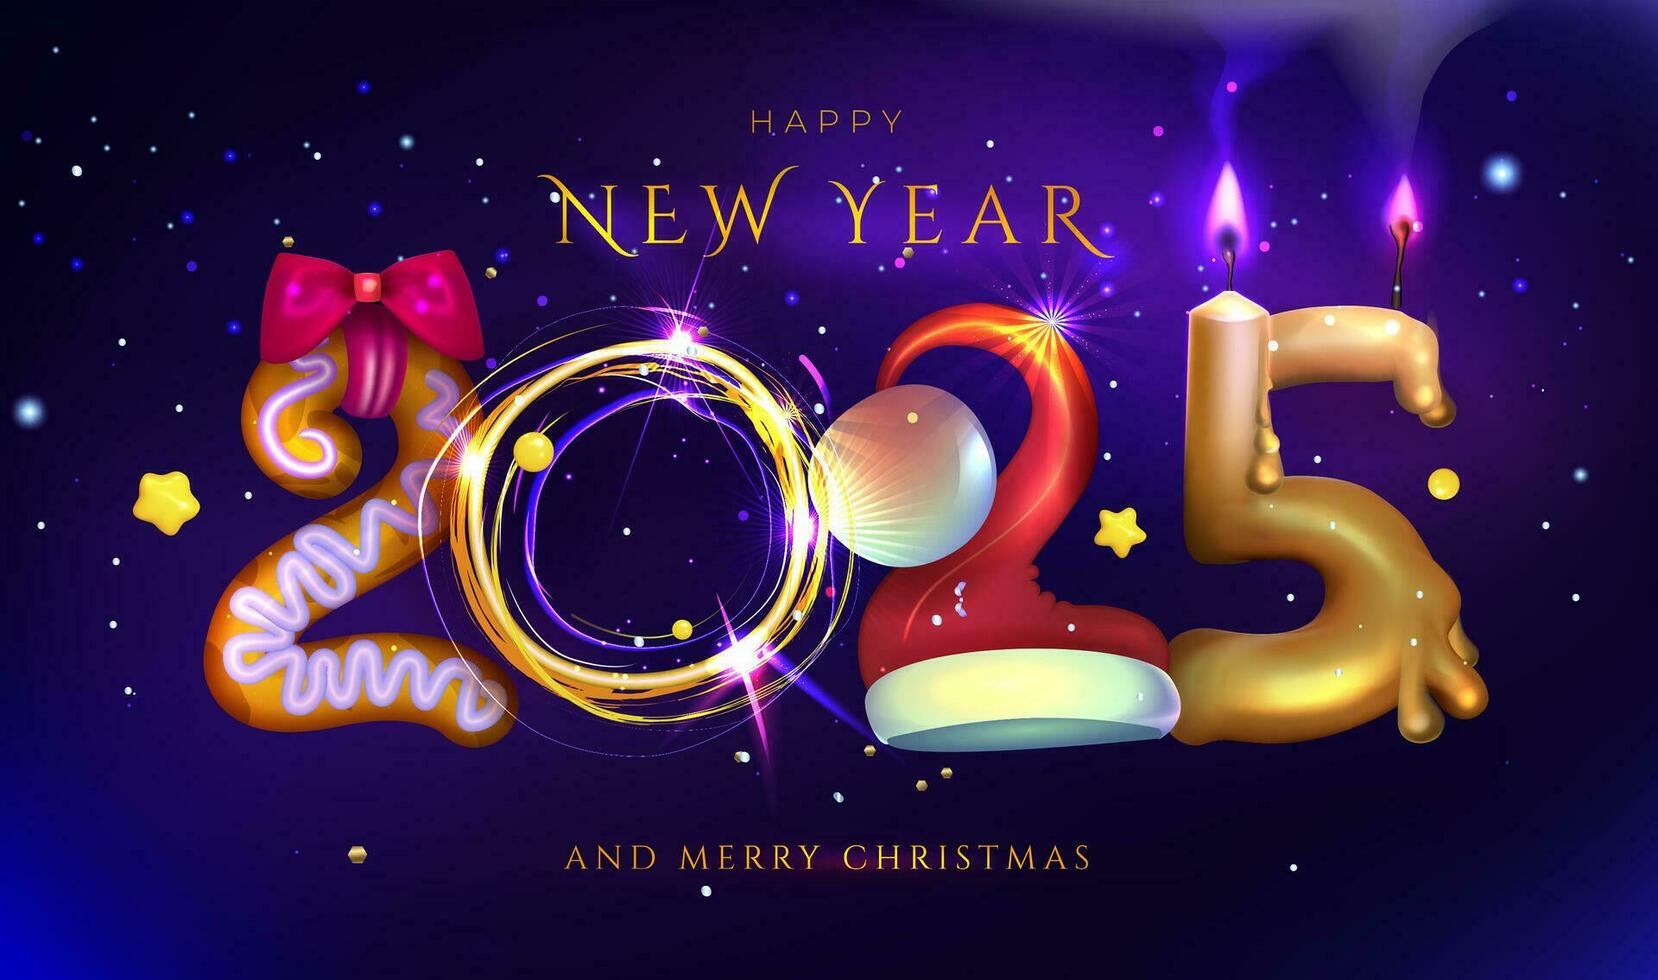 Happy New Year and Merry Christmas 2025 Vector illustration of candles, confetti, lights and cookies. Eps 10